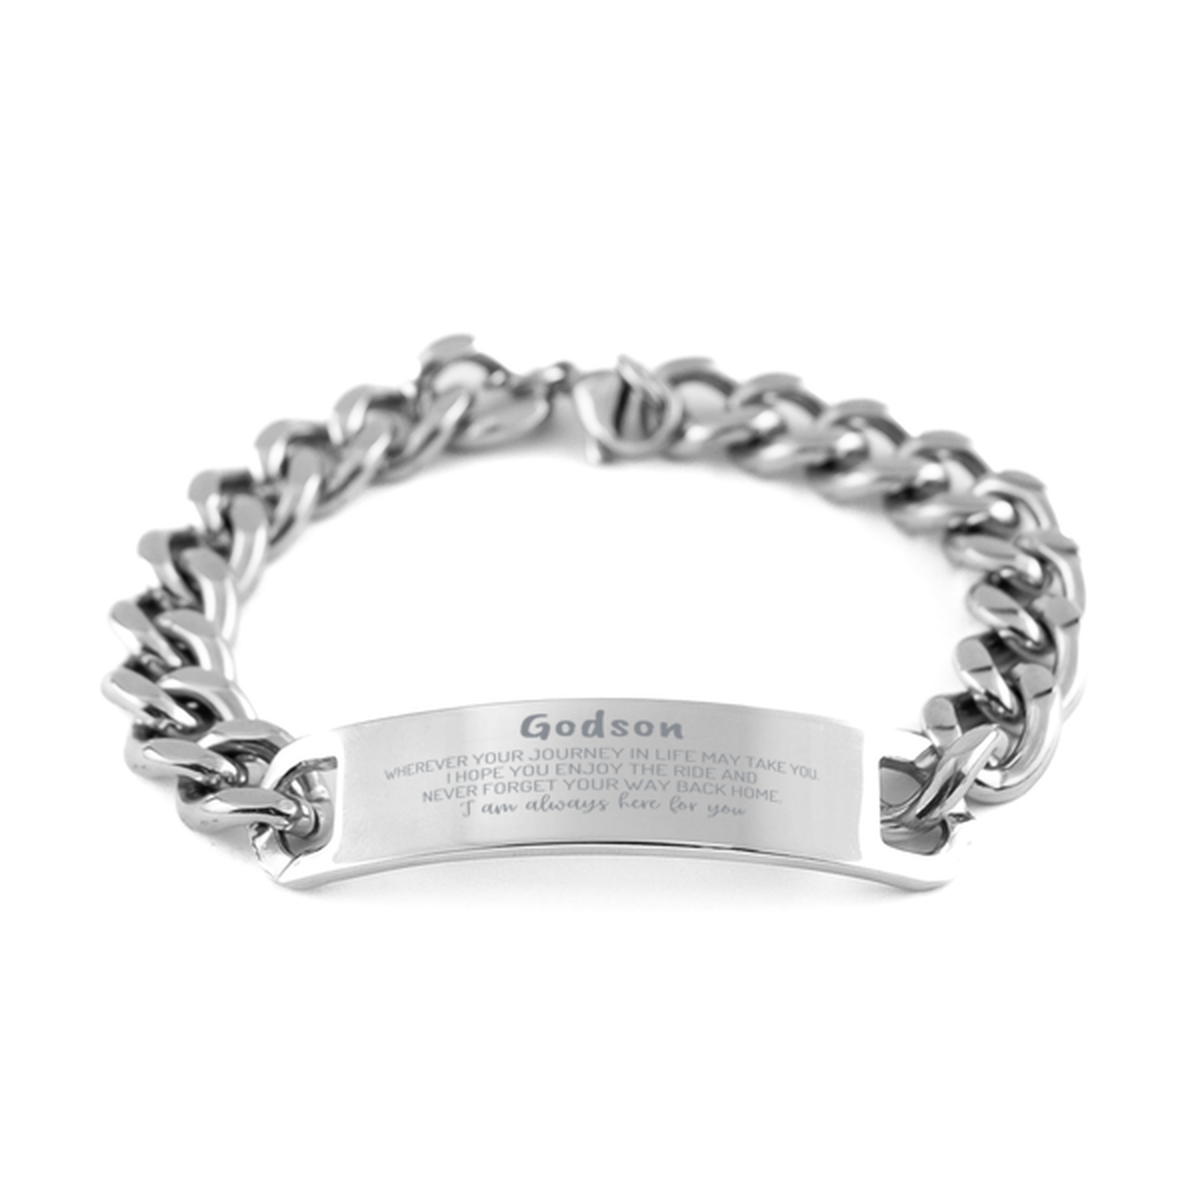 Godson wherever your journey in life may take you, I am always here for you Godson Cuban Chain Stainless Steel Bracelet, Awesome Christmas Gifts For Godson, Godson Birthday Gifts for Men Women Family Loved One